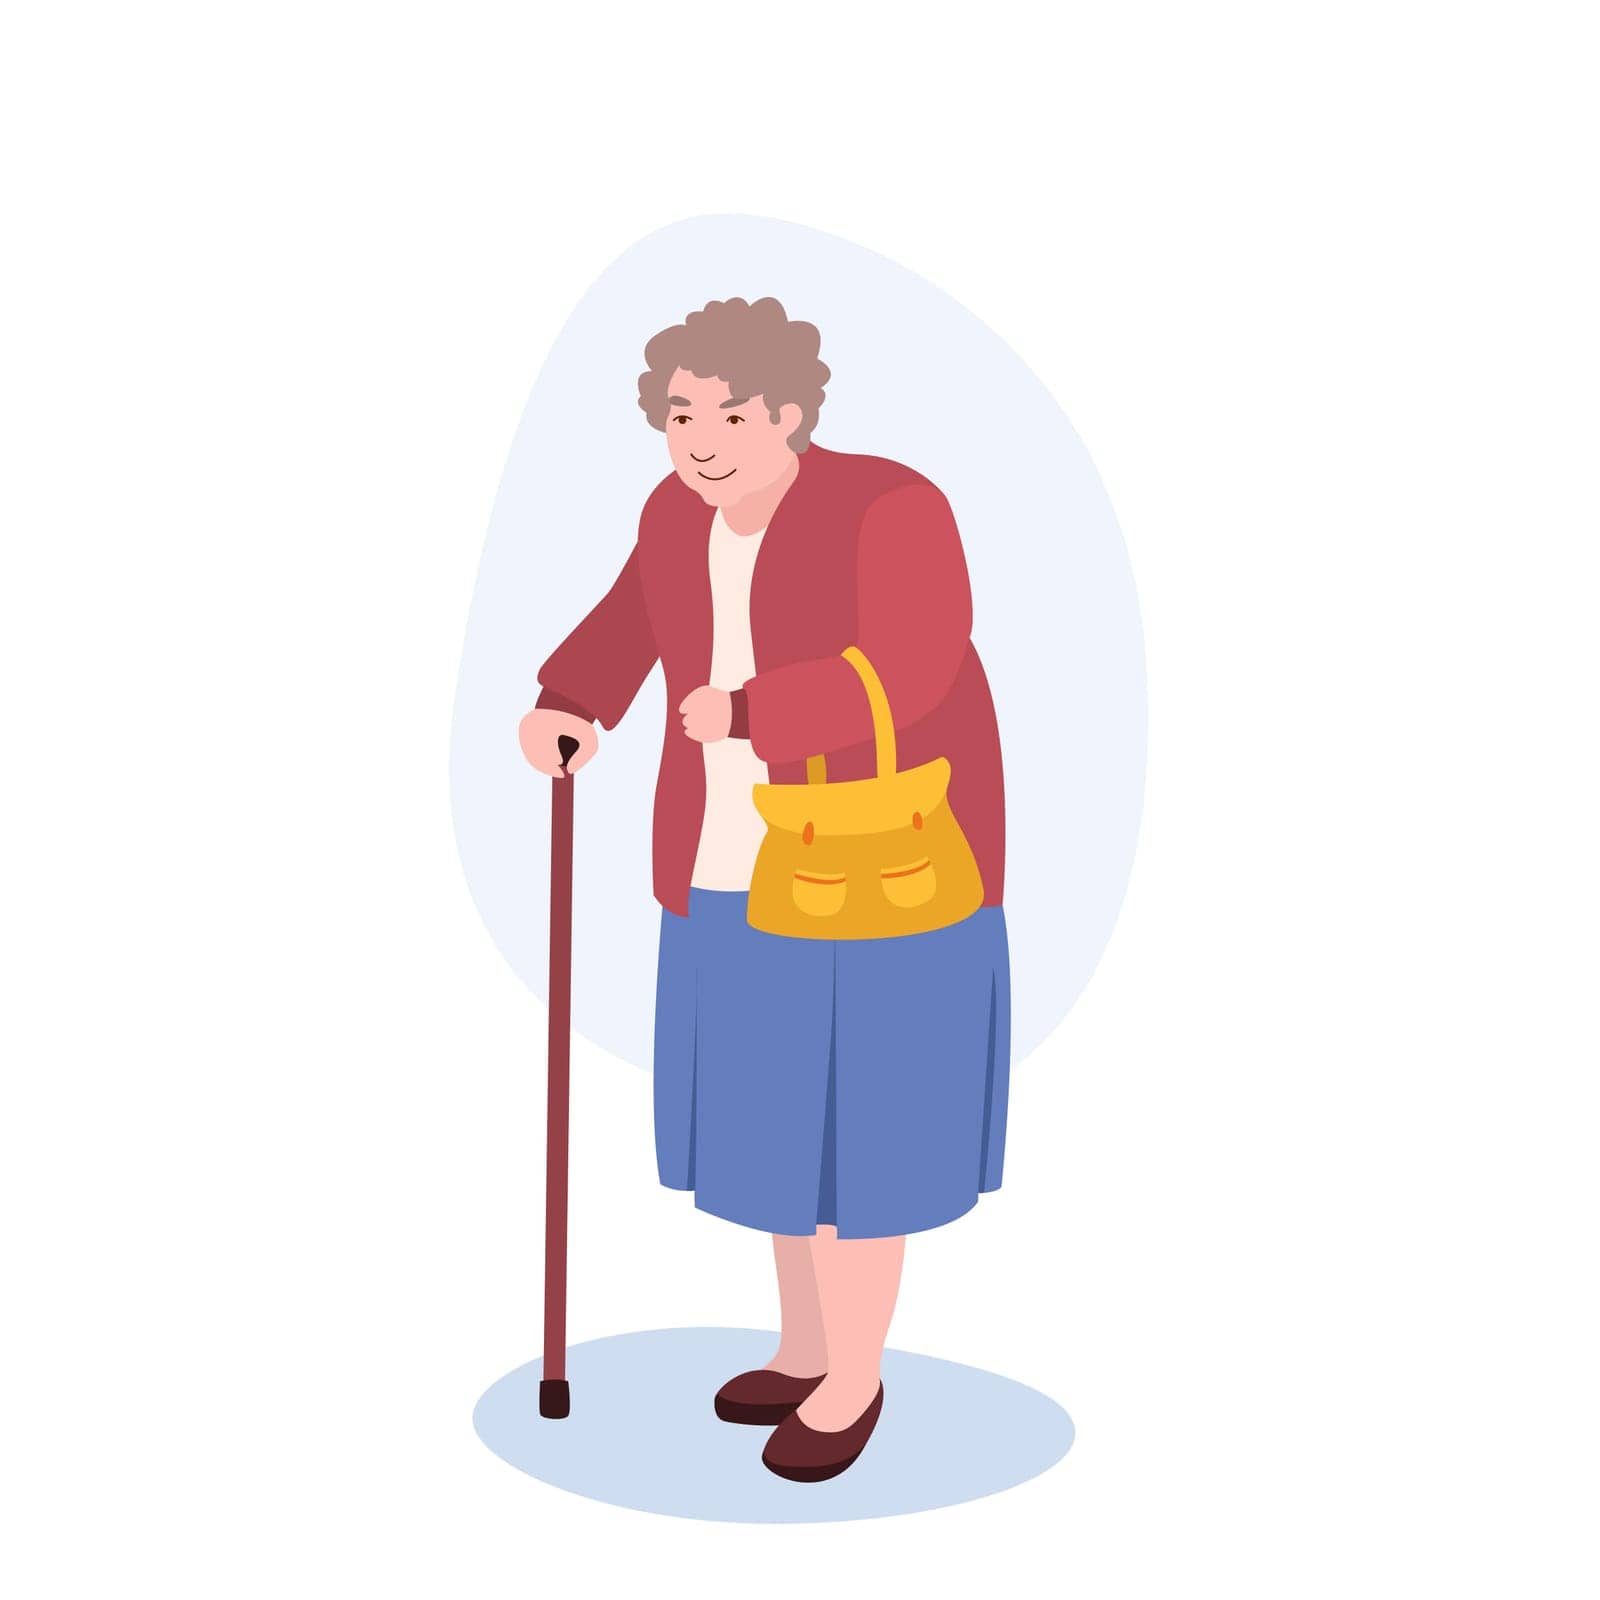 Old Lady With Cane illustration. Woman, bag, pensioner, stick. Creative editable vector graphic design.